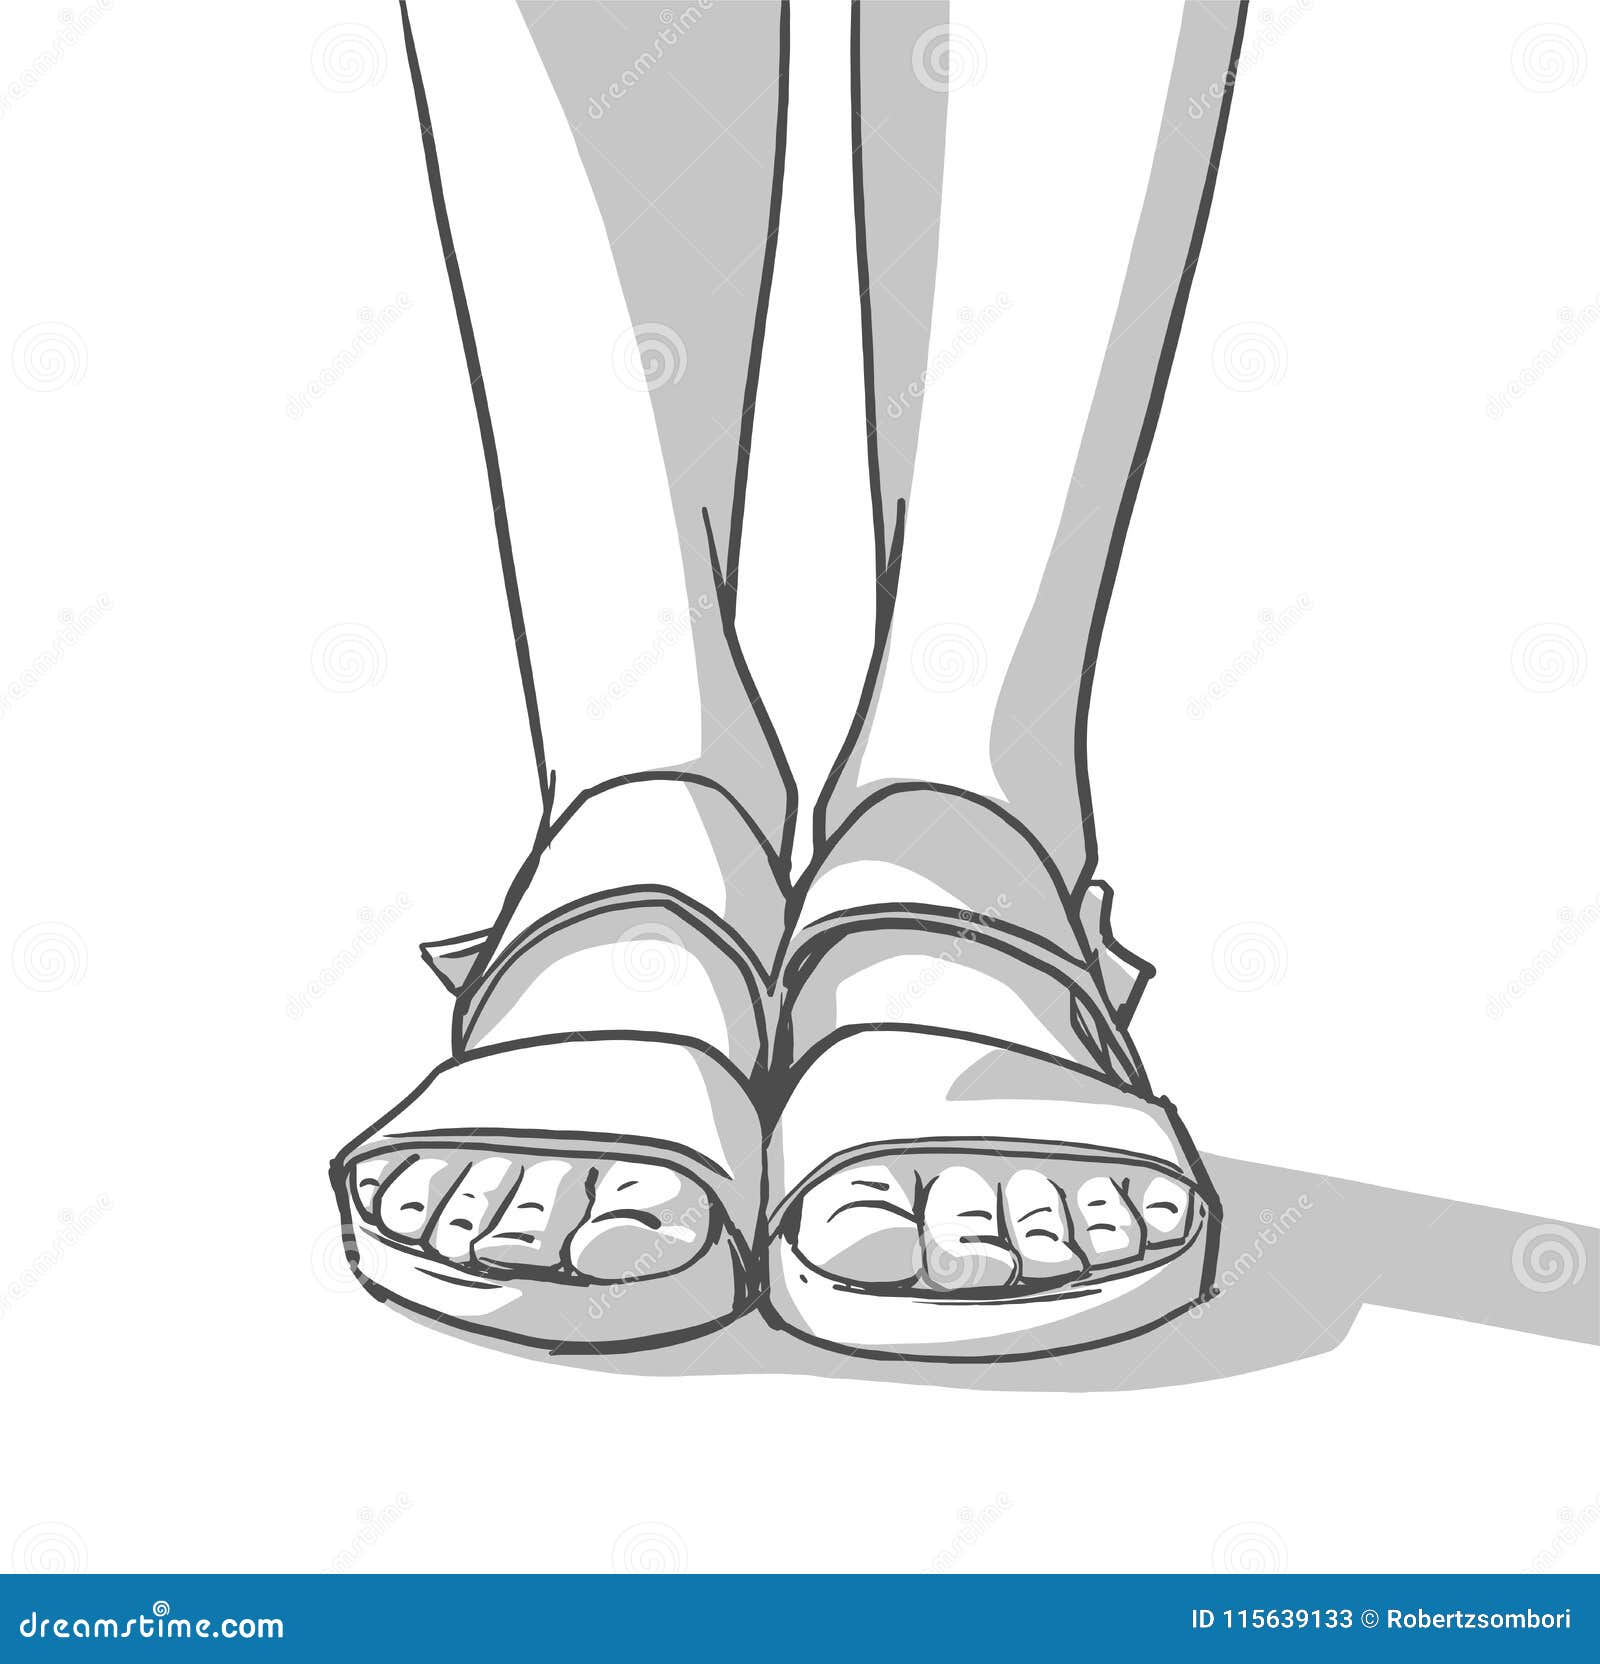 How To Draw Anime Sandals You ll learn how the artist develops a unique